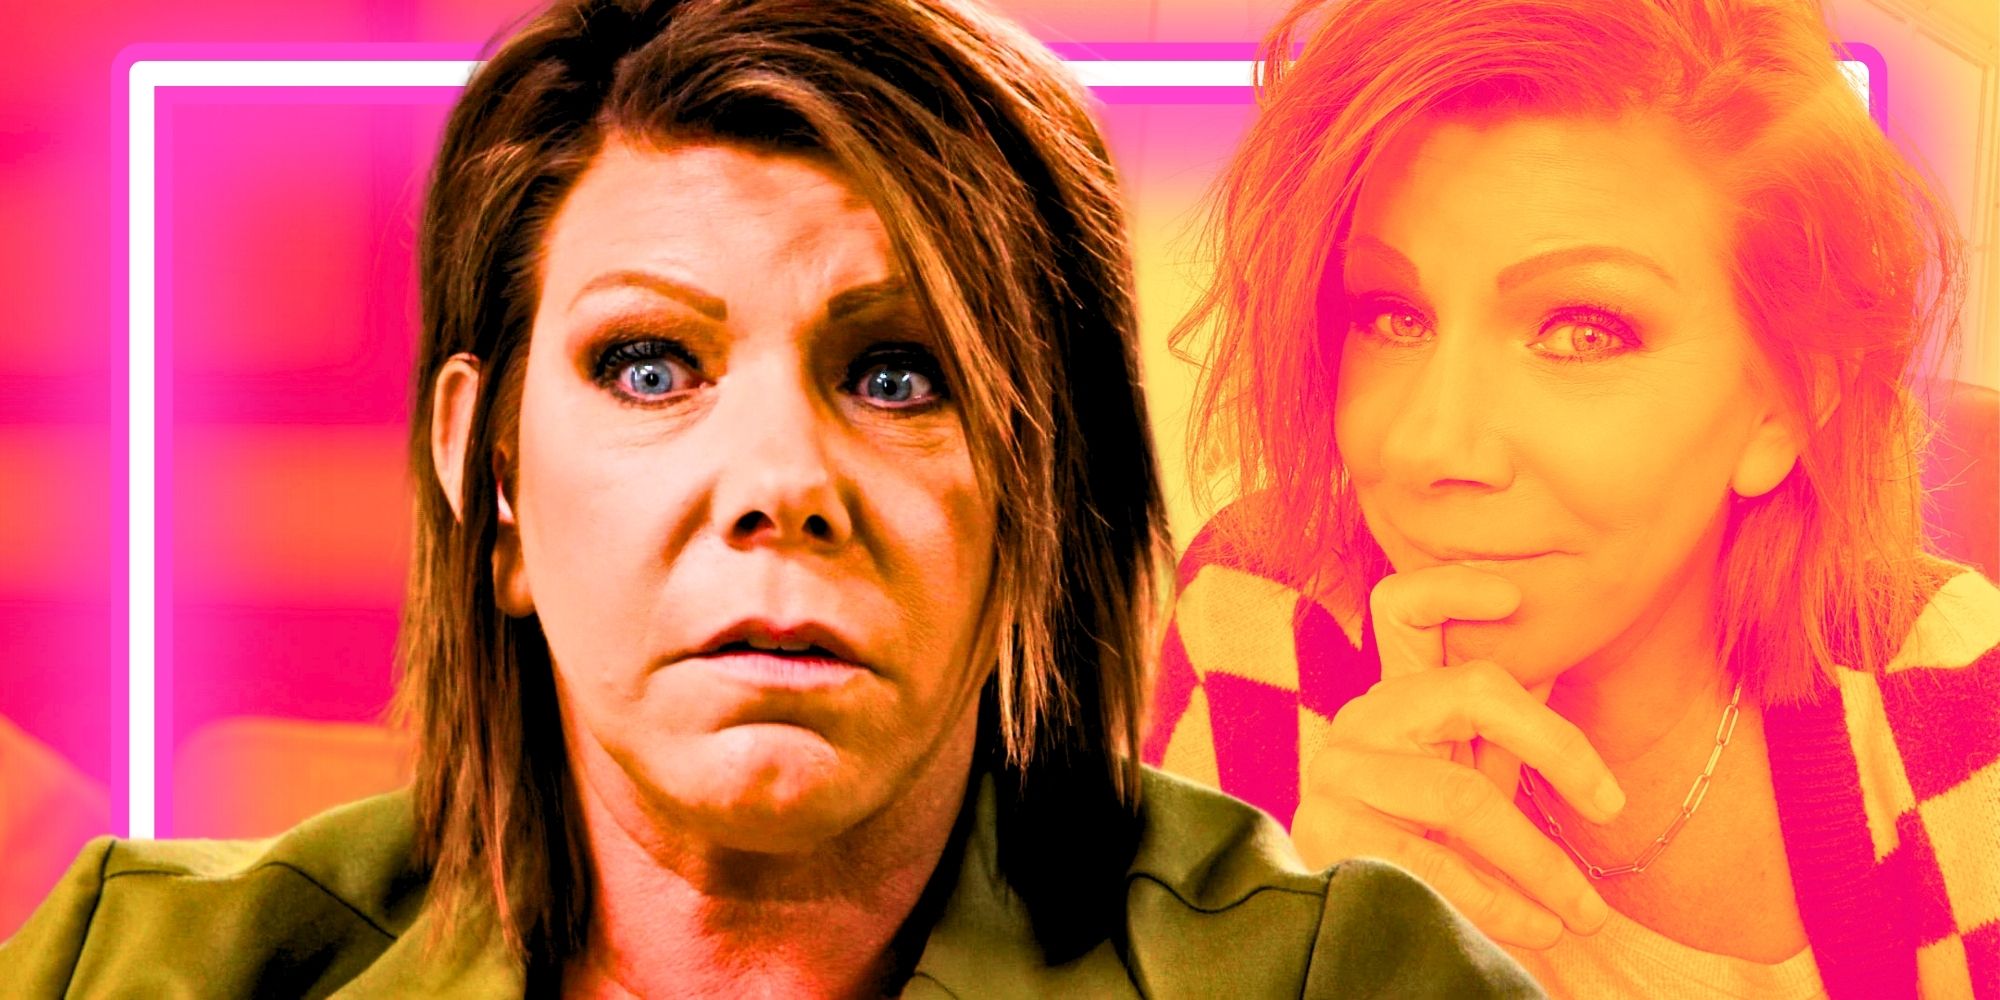 Sister Wives montage of Meri looking serious and happy pink and orange filtered background